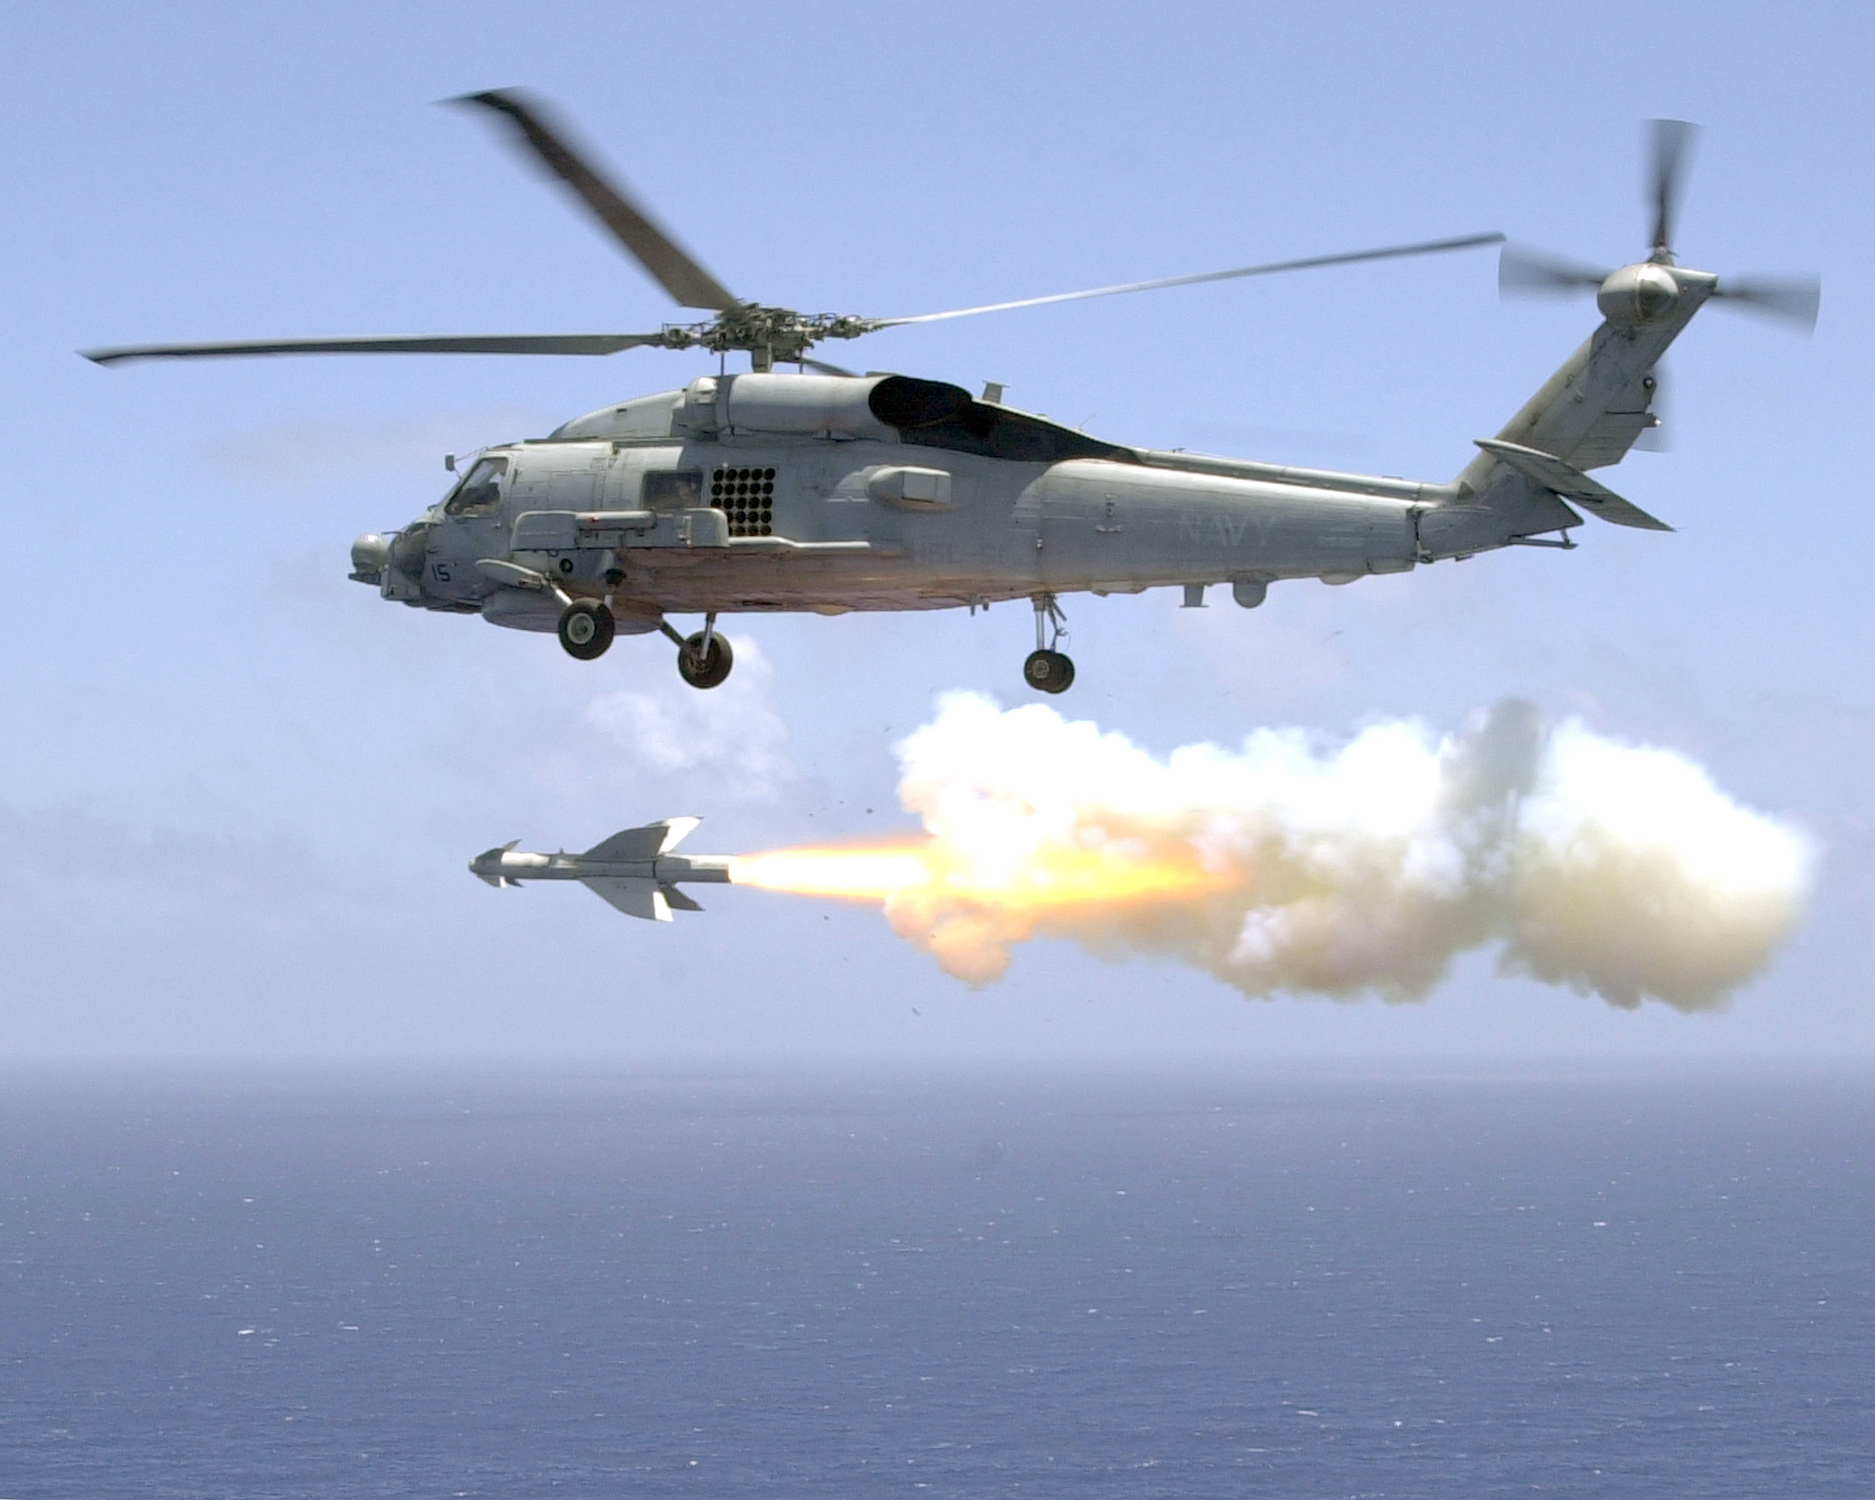 US Navy Helicopter Antisubmarine Light Five One (HSL-51) fires an AGM-119 “Penguin” anti-ship missile from an SH-60B Sea Hawk helicopter